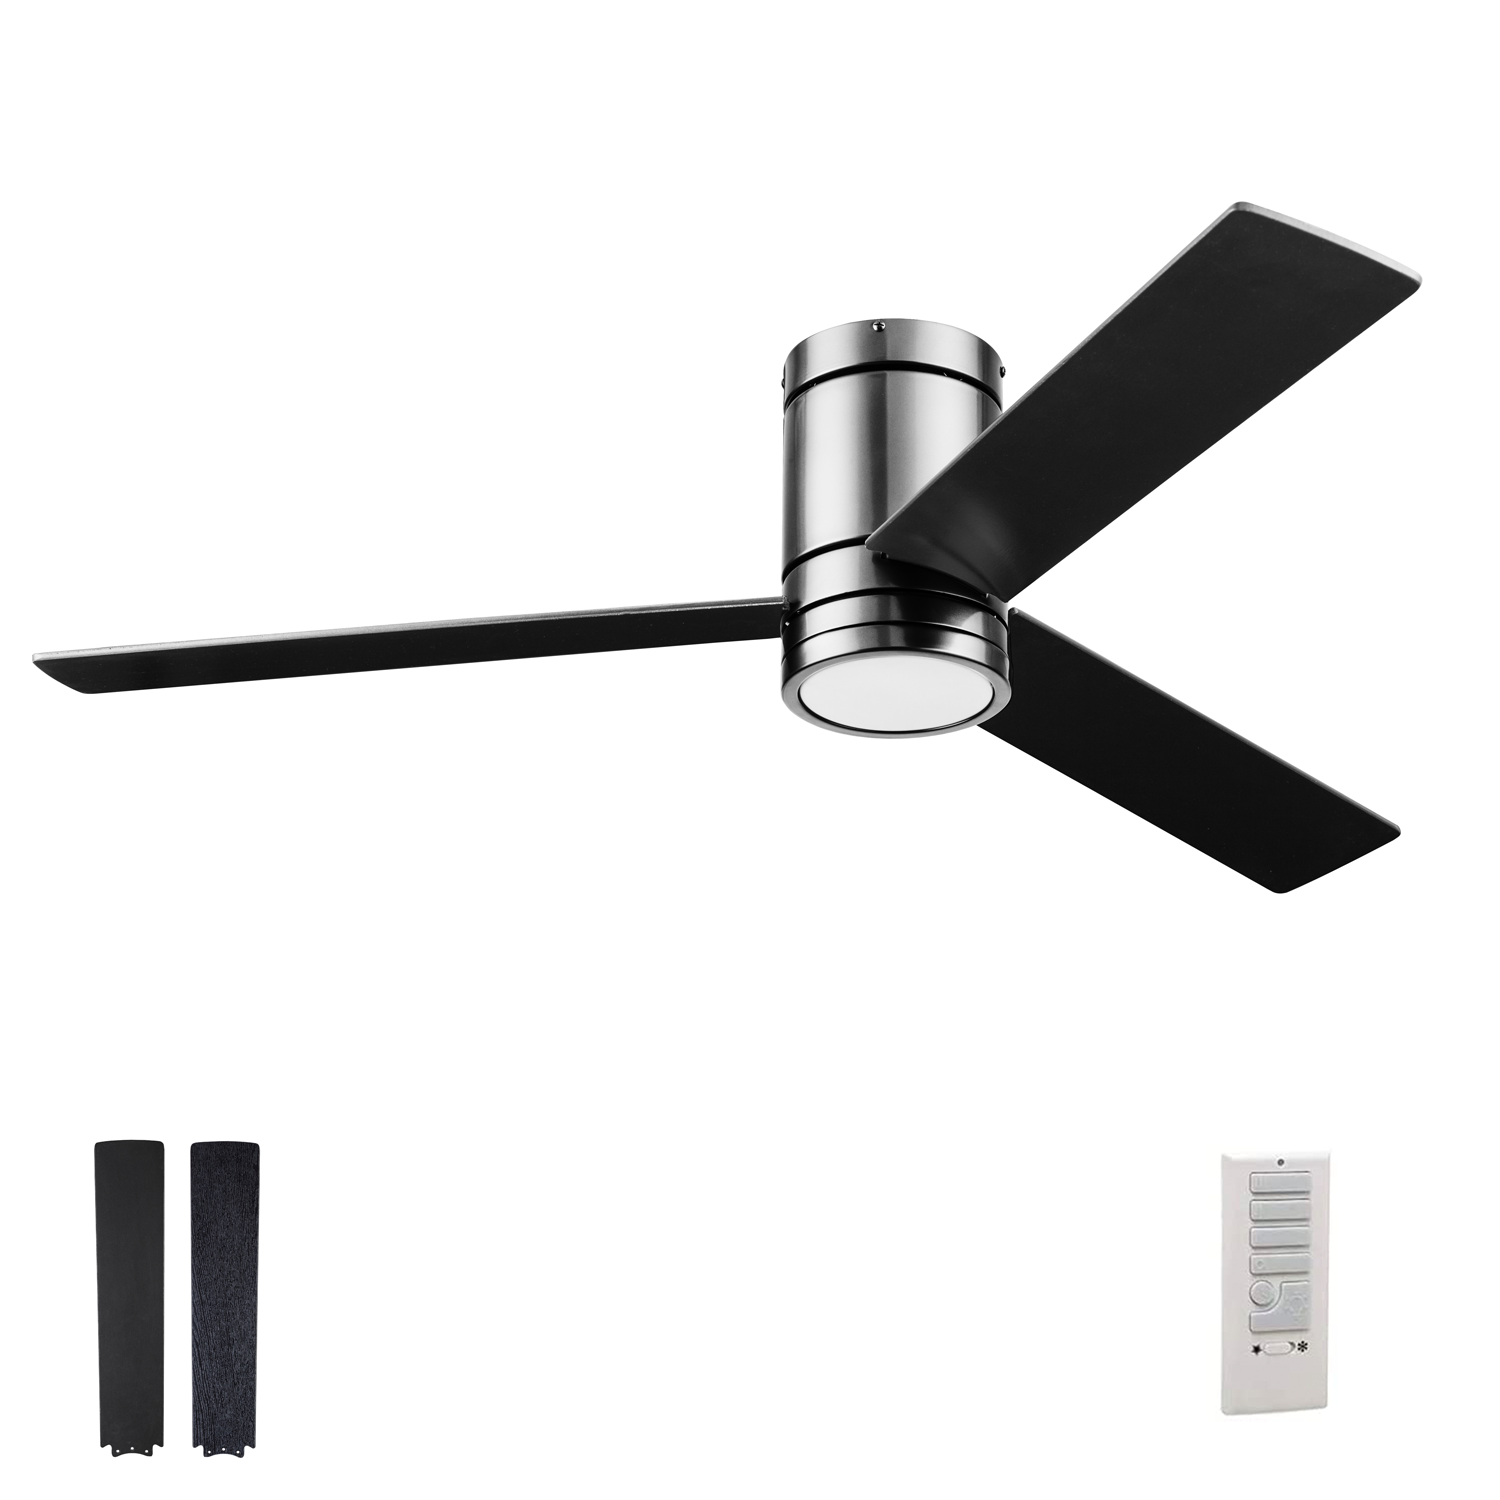 52 Inch Espy, Gun Metal, Remote Control, Ceiling Fan by Prominence Home